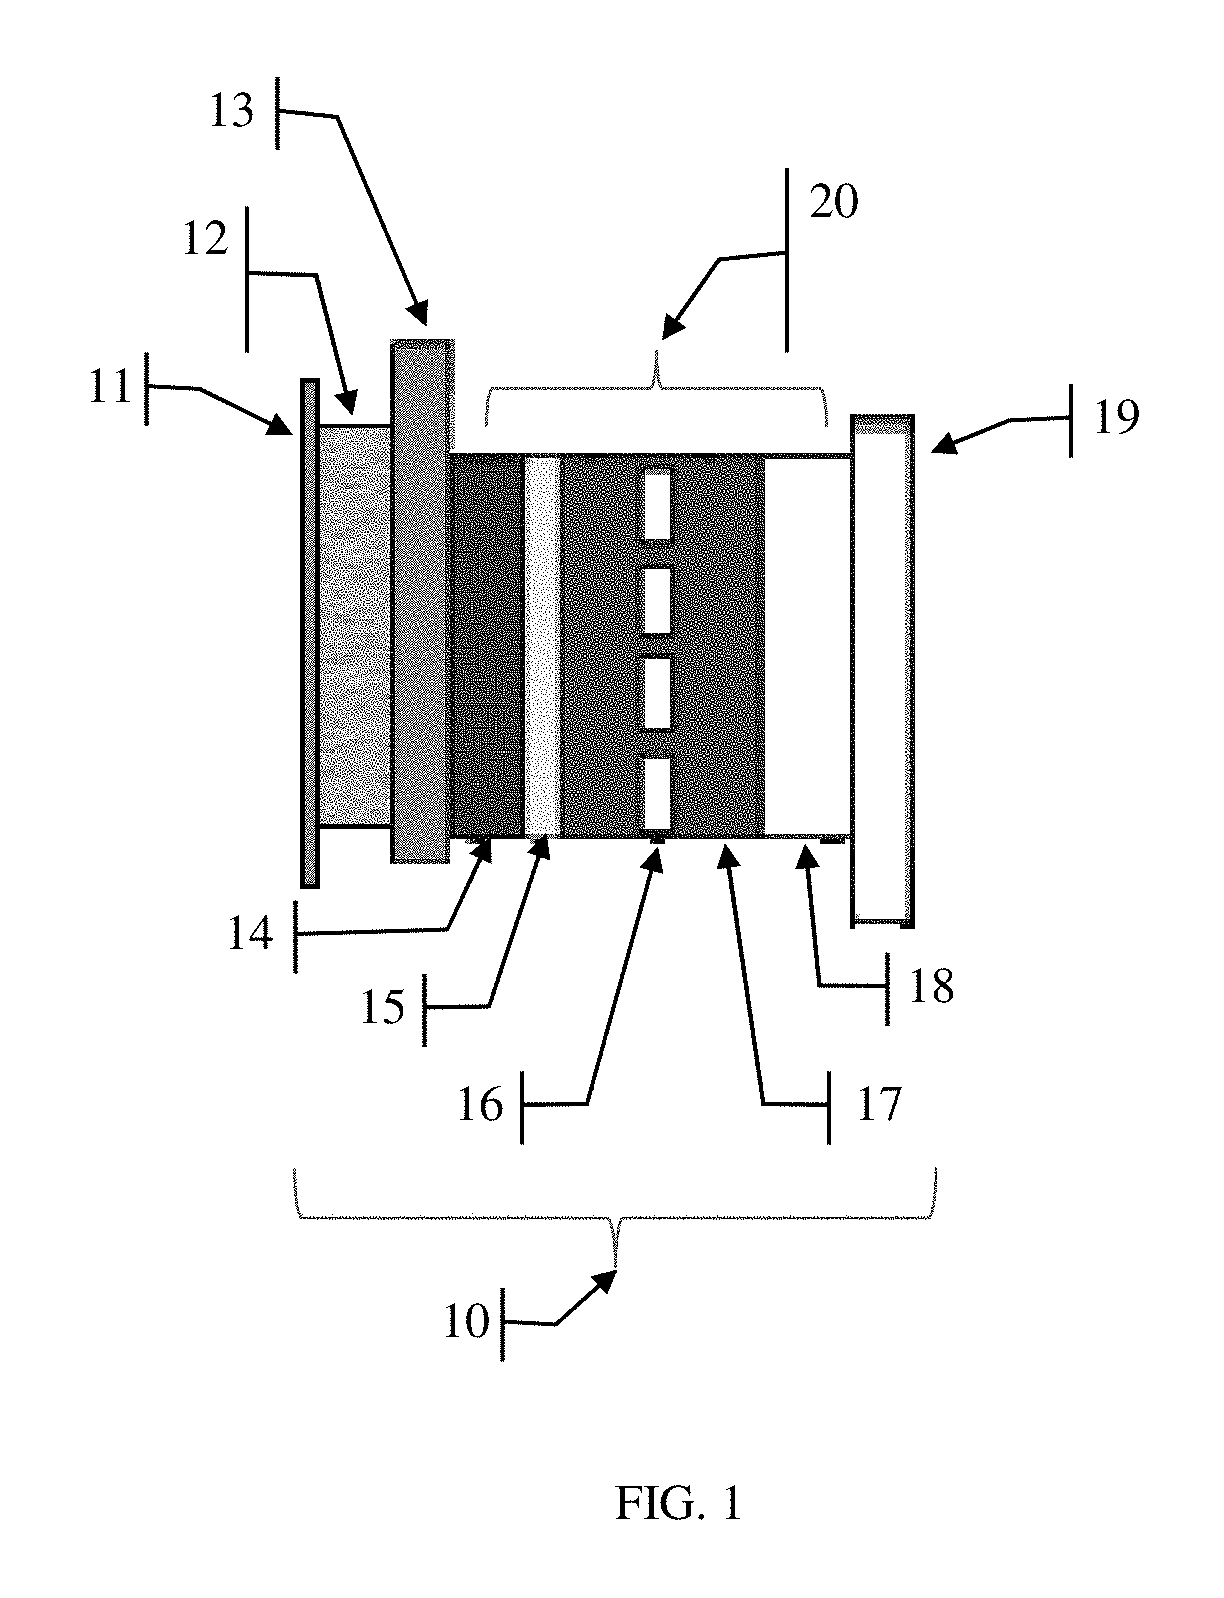 Self-recharging direct conversion electrical energy storage device and method